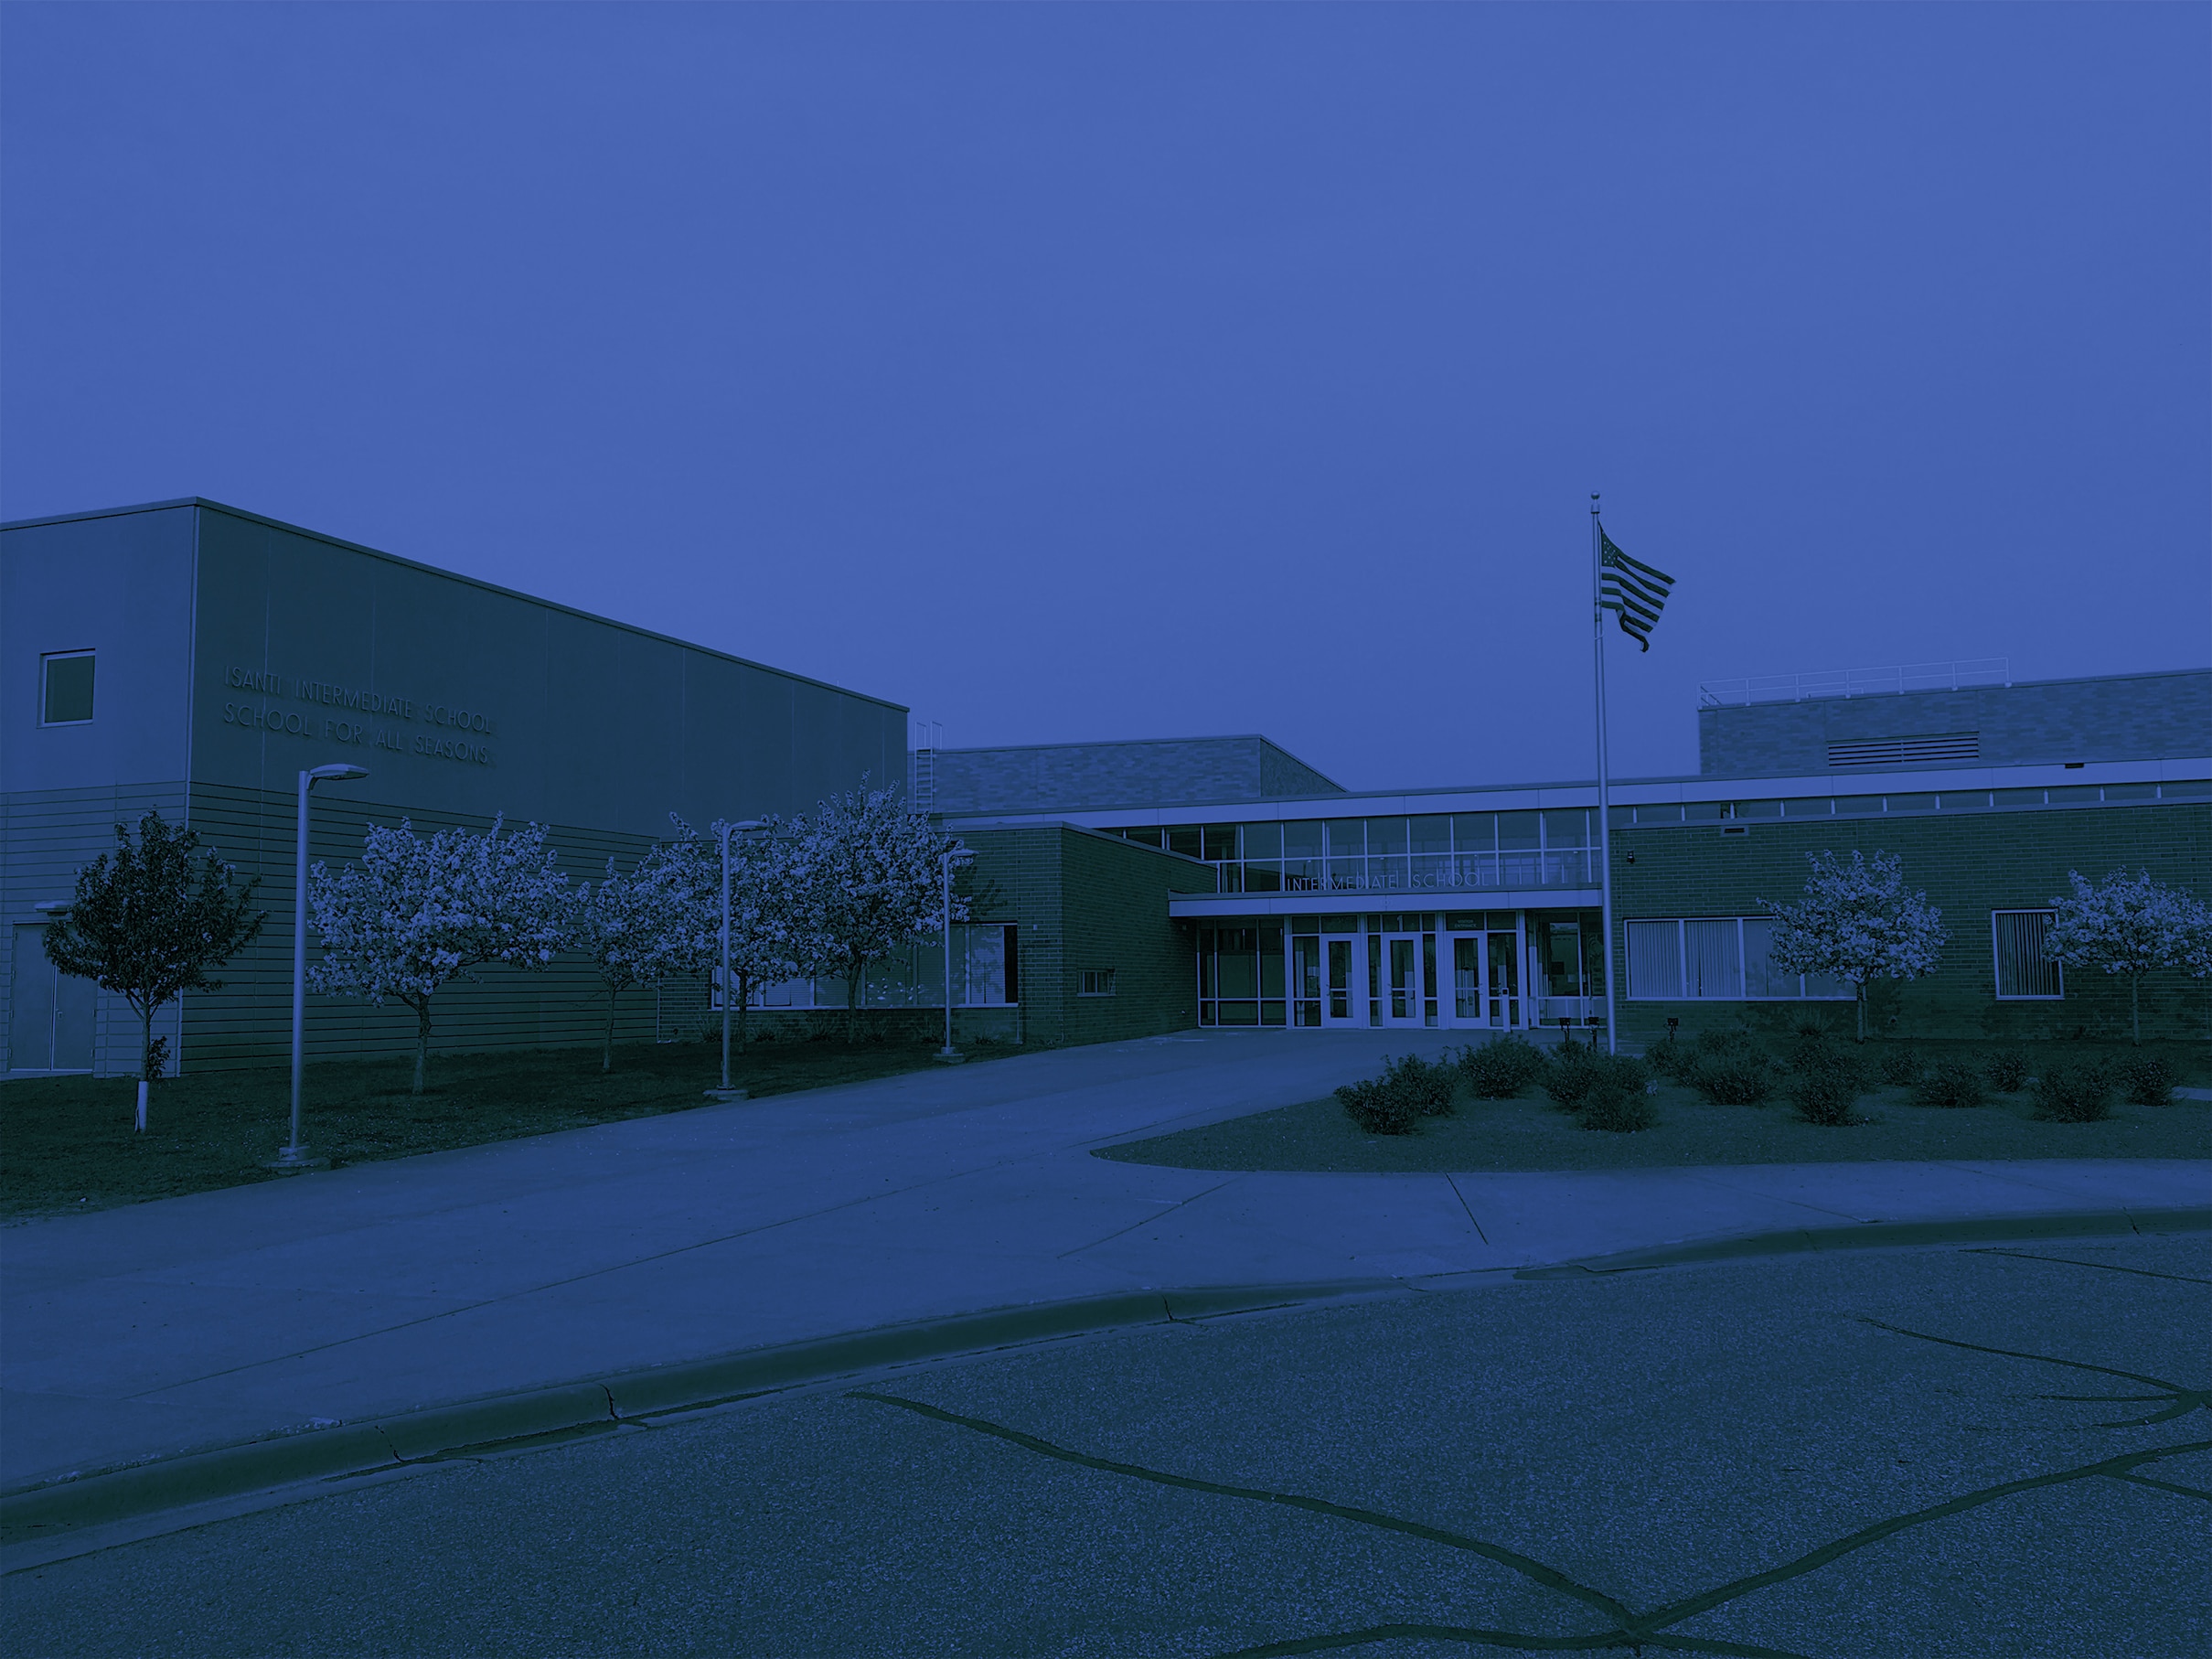 Outdoor view of high school with blue overlay